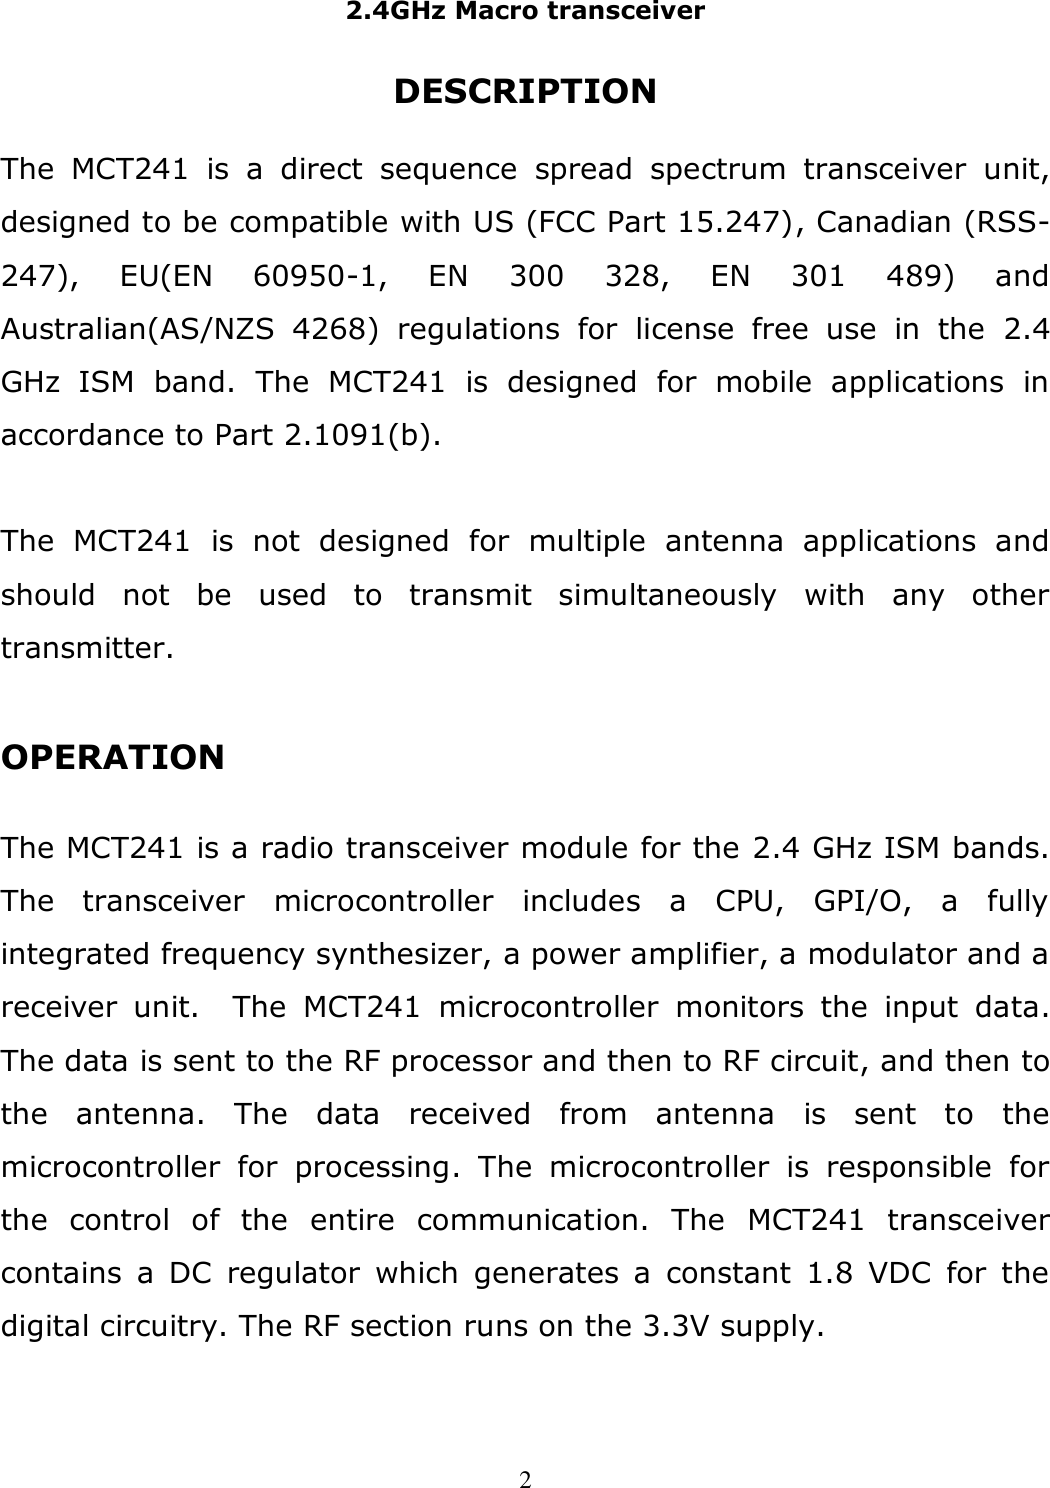 2.4GHz Macro transceiver  2 DESCRIPTION  The  MCT241  is  a  direct  sequence  spread  spectrum  transceiver  unit, designed to be compatible with US (FCC Part 15.247), Canadian (RSS-247),  EU(EN  60950-1,  EN  300  328,  EN  301  489)  and Australian(AS/NZS  4268)  regulations  for  license  free  use  in  the  2.4 GHz  ISM  band.  The  MCT241  is  designed  for  mobile  applications  in accordance to Part 2.1091(b).  The  MCT241  is  not  designed  for  multiple  antenna  applications  and should  not  be  used  to  transmit  simultaneously  with  any  other transmitter.  OPERATION  The MCT241 is a radio transceiver module for the 2.4 GHz ISM bands. The  transceiver  microcontroller  includes  a  CPU,  GPI/O,  a  fully integrated frequency synthesizer, a power amplifier, a modulator and a receiver  unit.    The  MCT241  microcontroller  monitors  the  input  data.  The data is sent to the RF processor and then to RF circuit, and then to the  antenna.  The  data  received  from  antenna  is  sent  to  the microcontroller  for  processing.  The  microcontroller  is  responsible  for the  control  of  the  entire  communication.  The  MCT241  transceiver contains a  DC  regulator  which  generates  a  constant  1.8  VDC  for  the digital circuitry. The RF section runs on the 3.3V supply.  